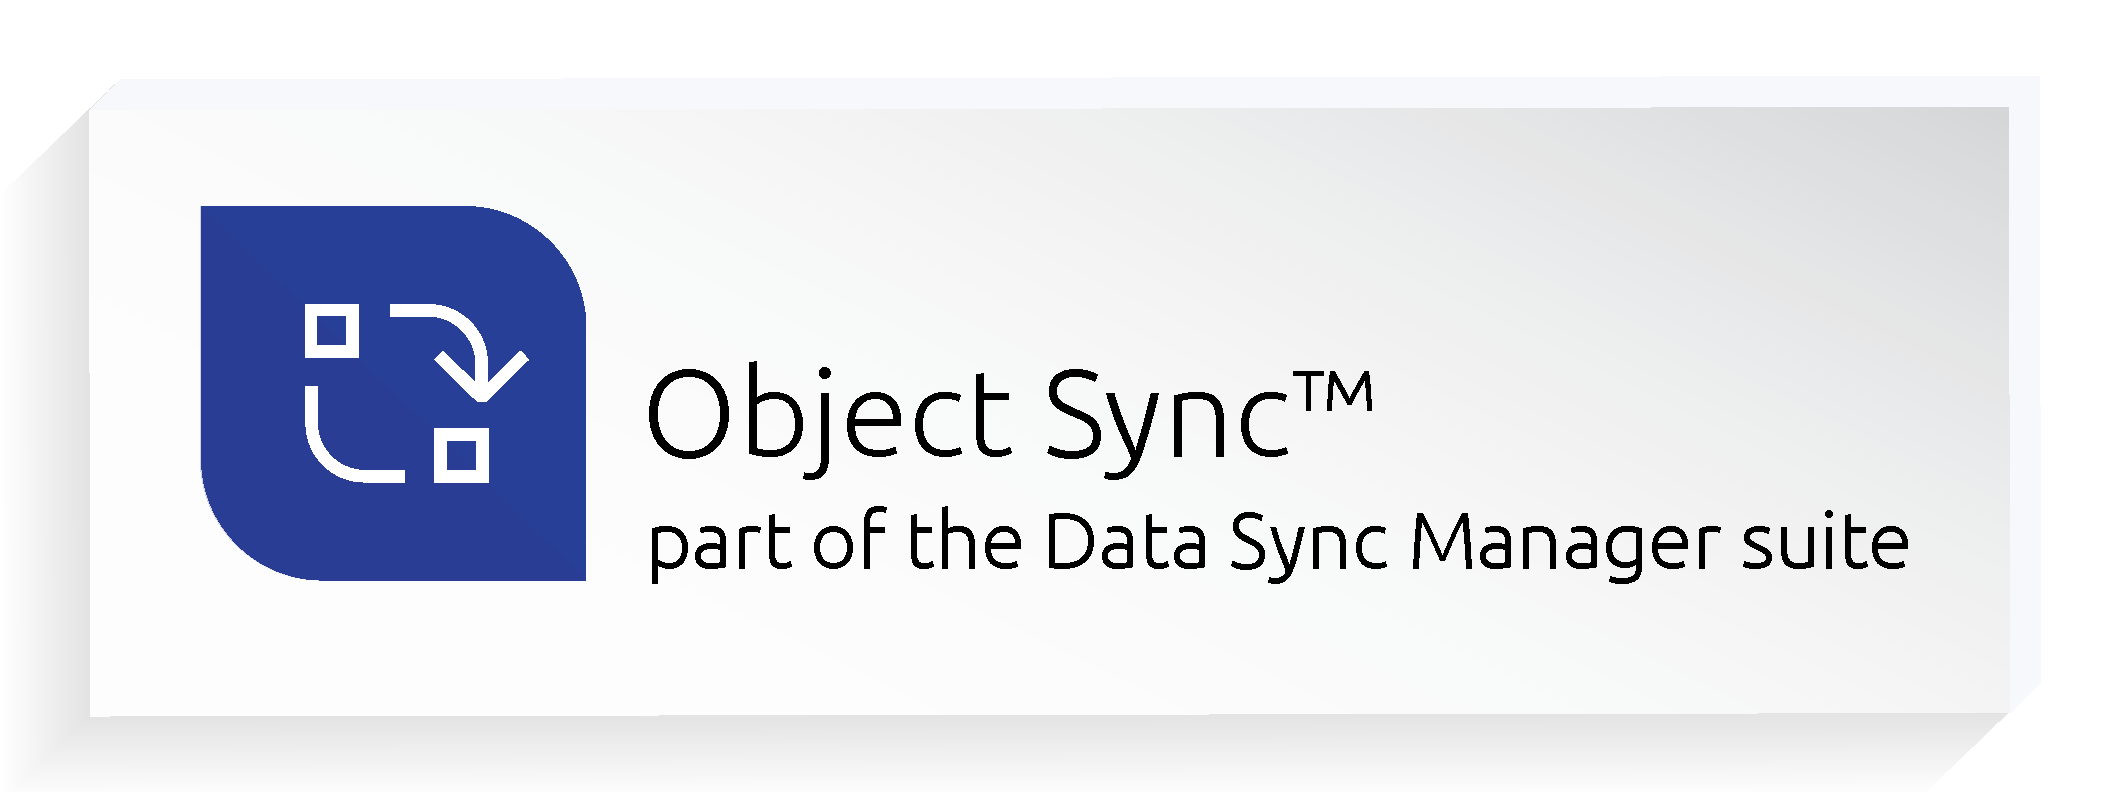 Object Sync